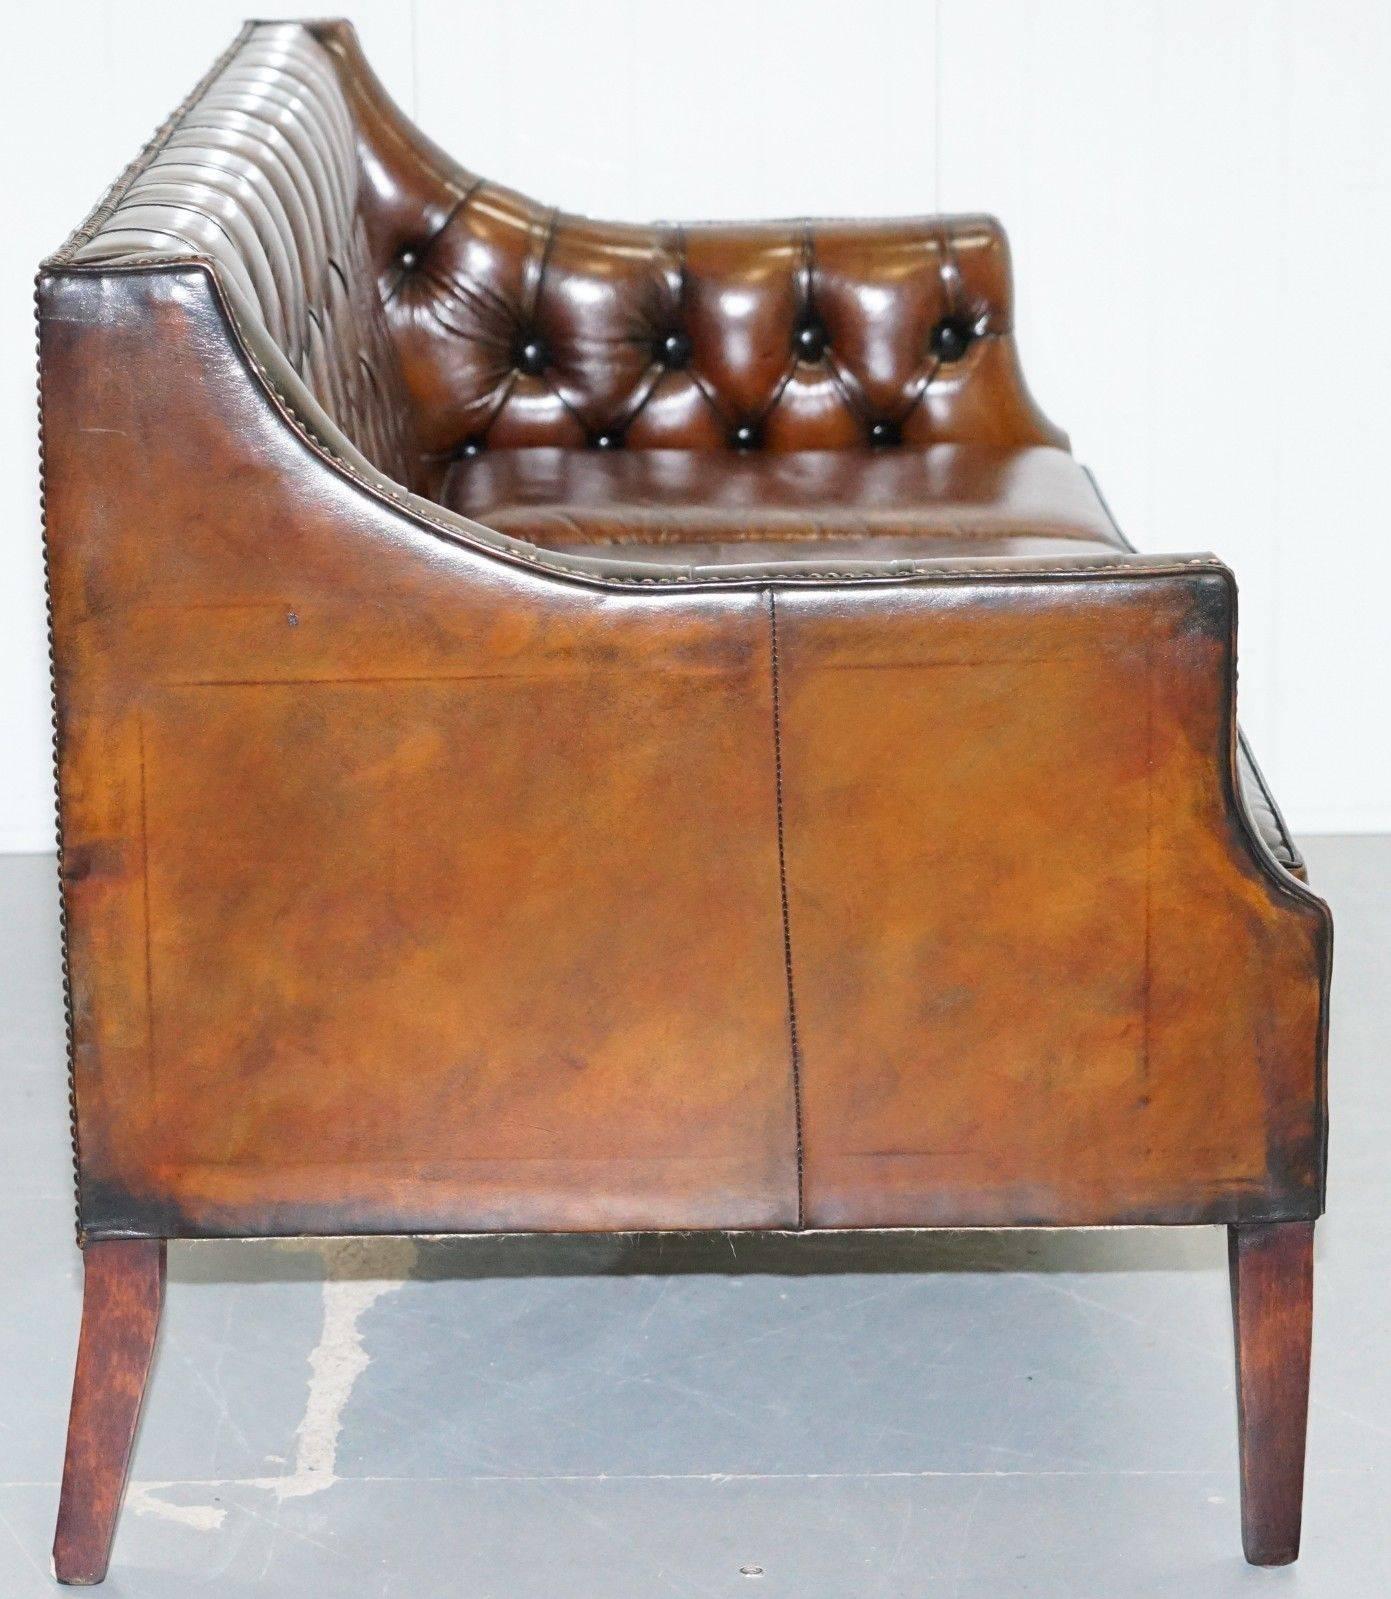 New George Smith Chesterfield Brown Leather Sofa Armchairs Available 2